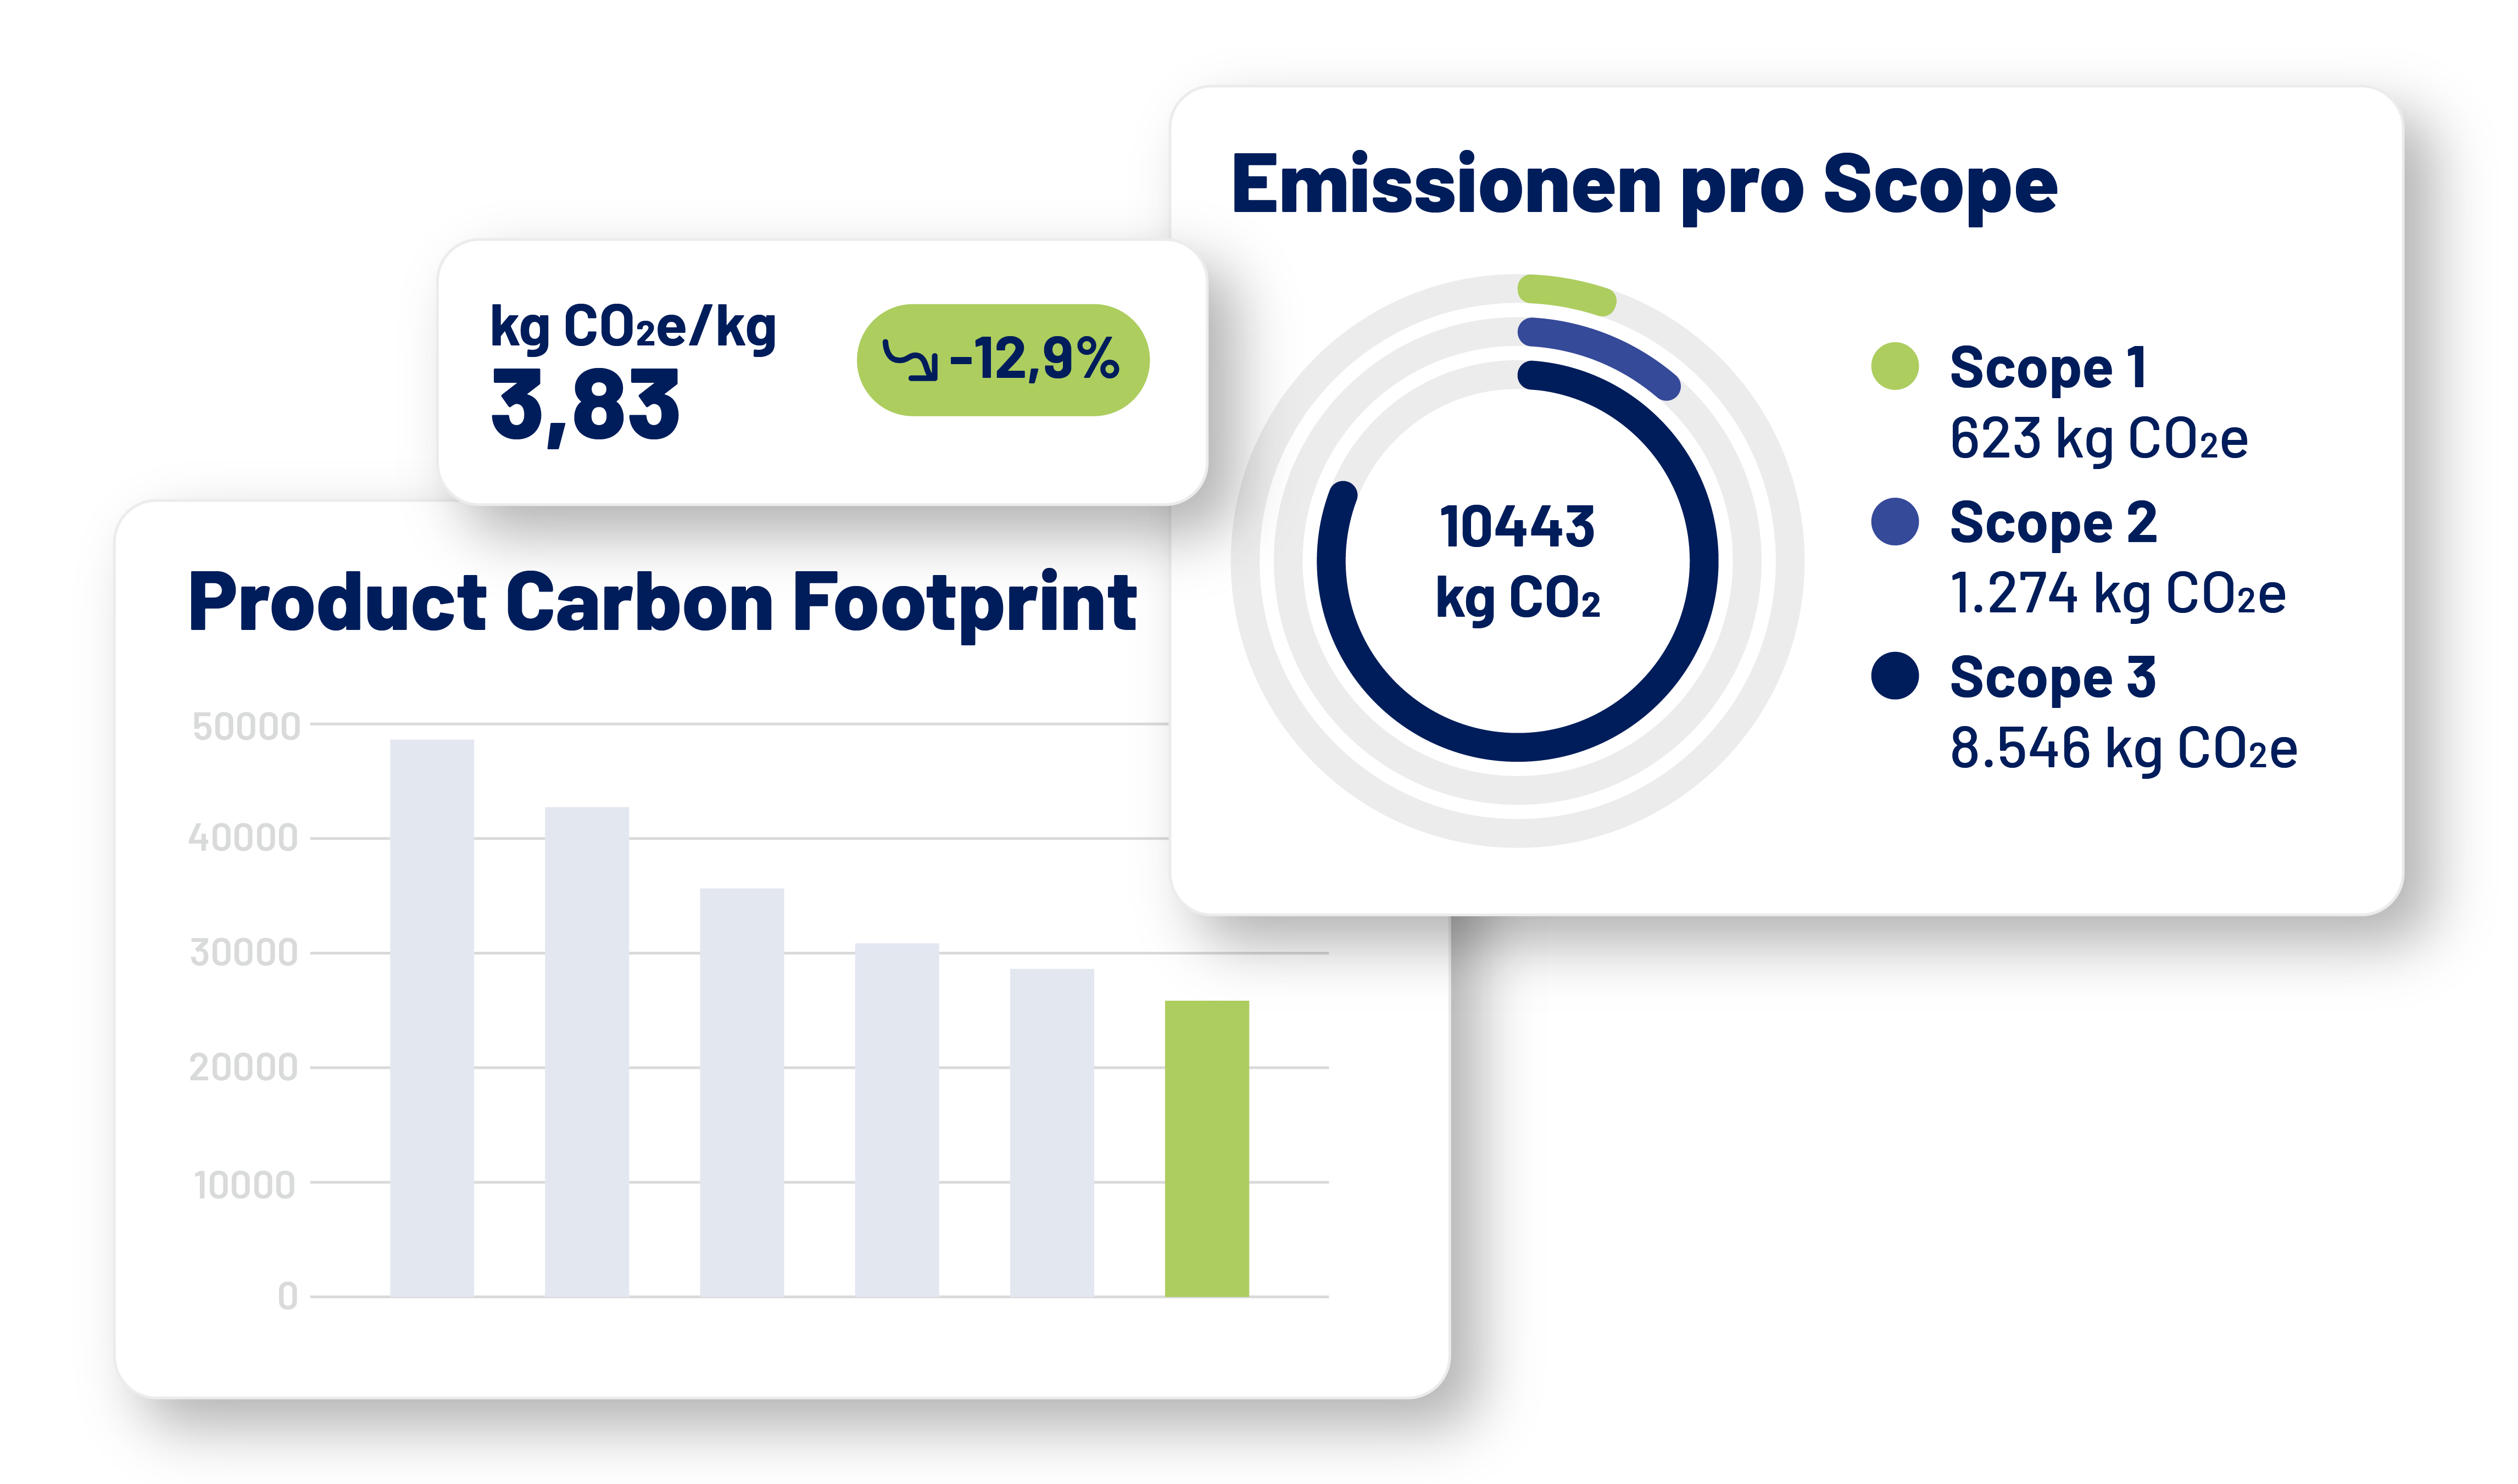 Infographic with an example analysis of a product's emissions based on application area and product version